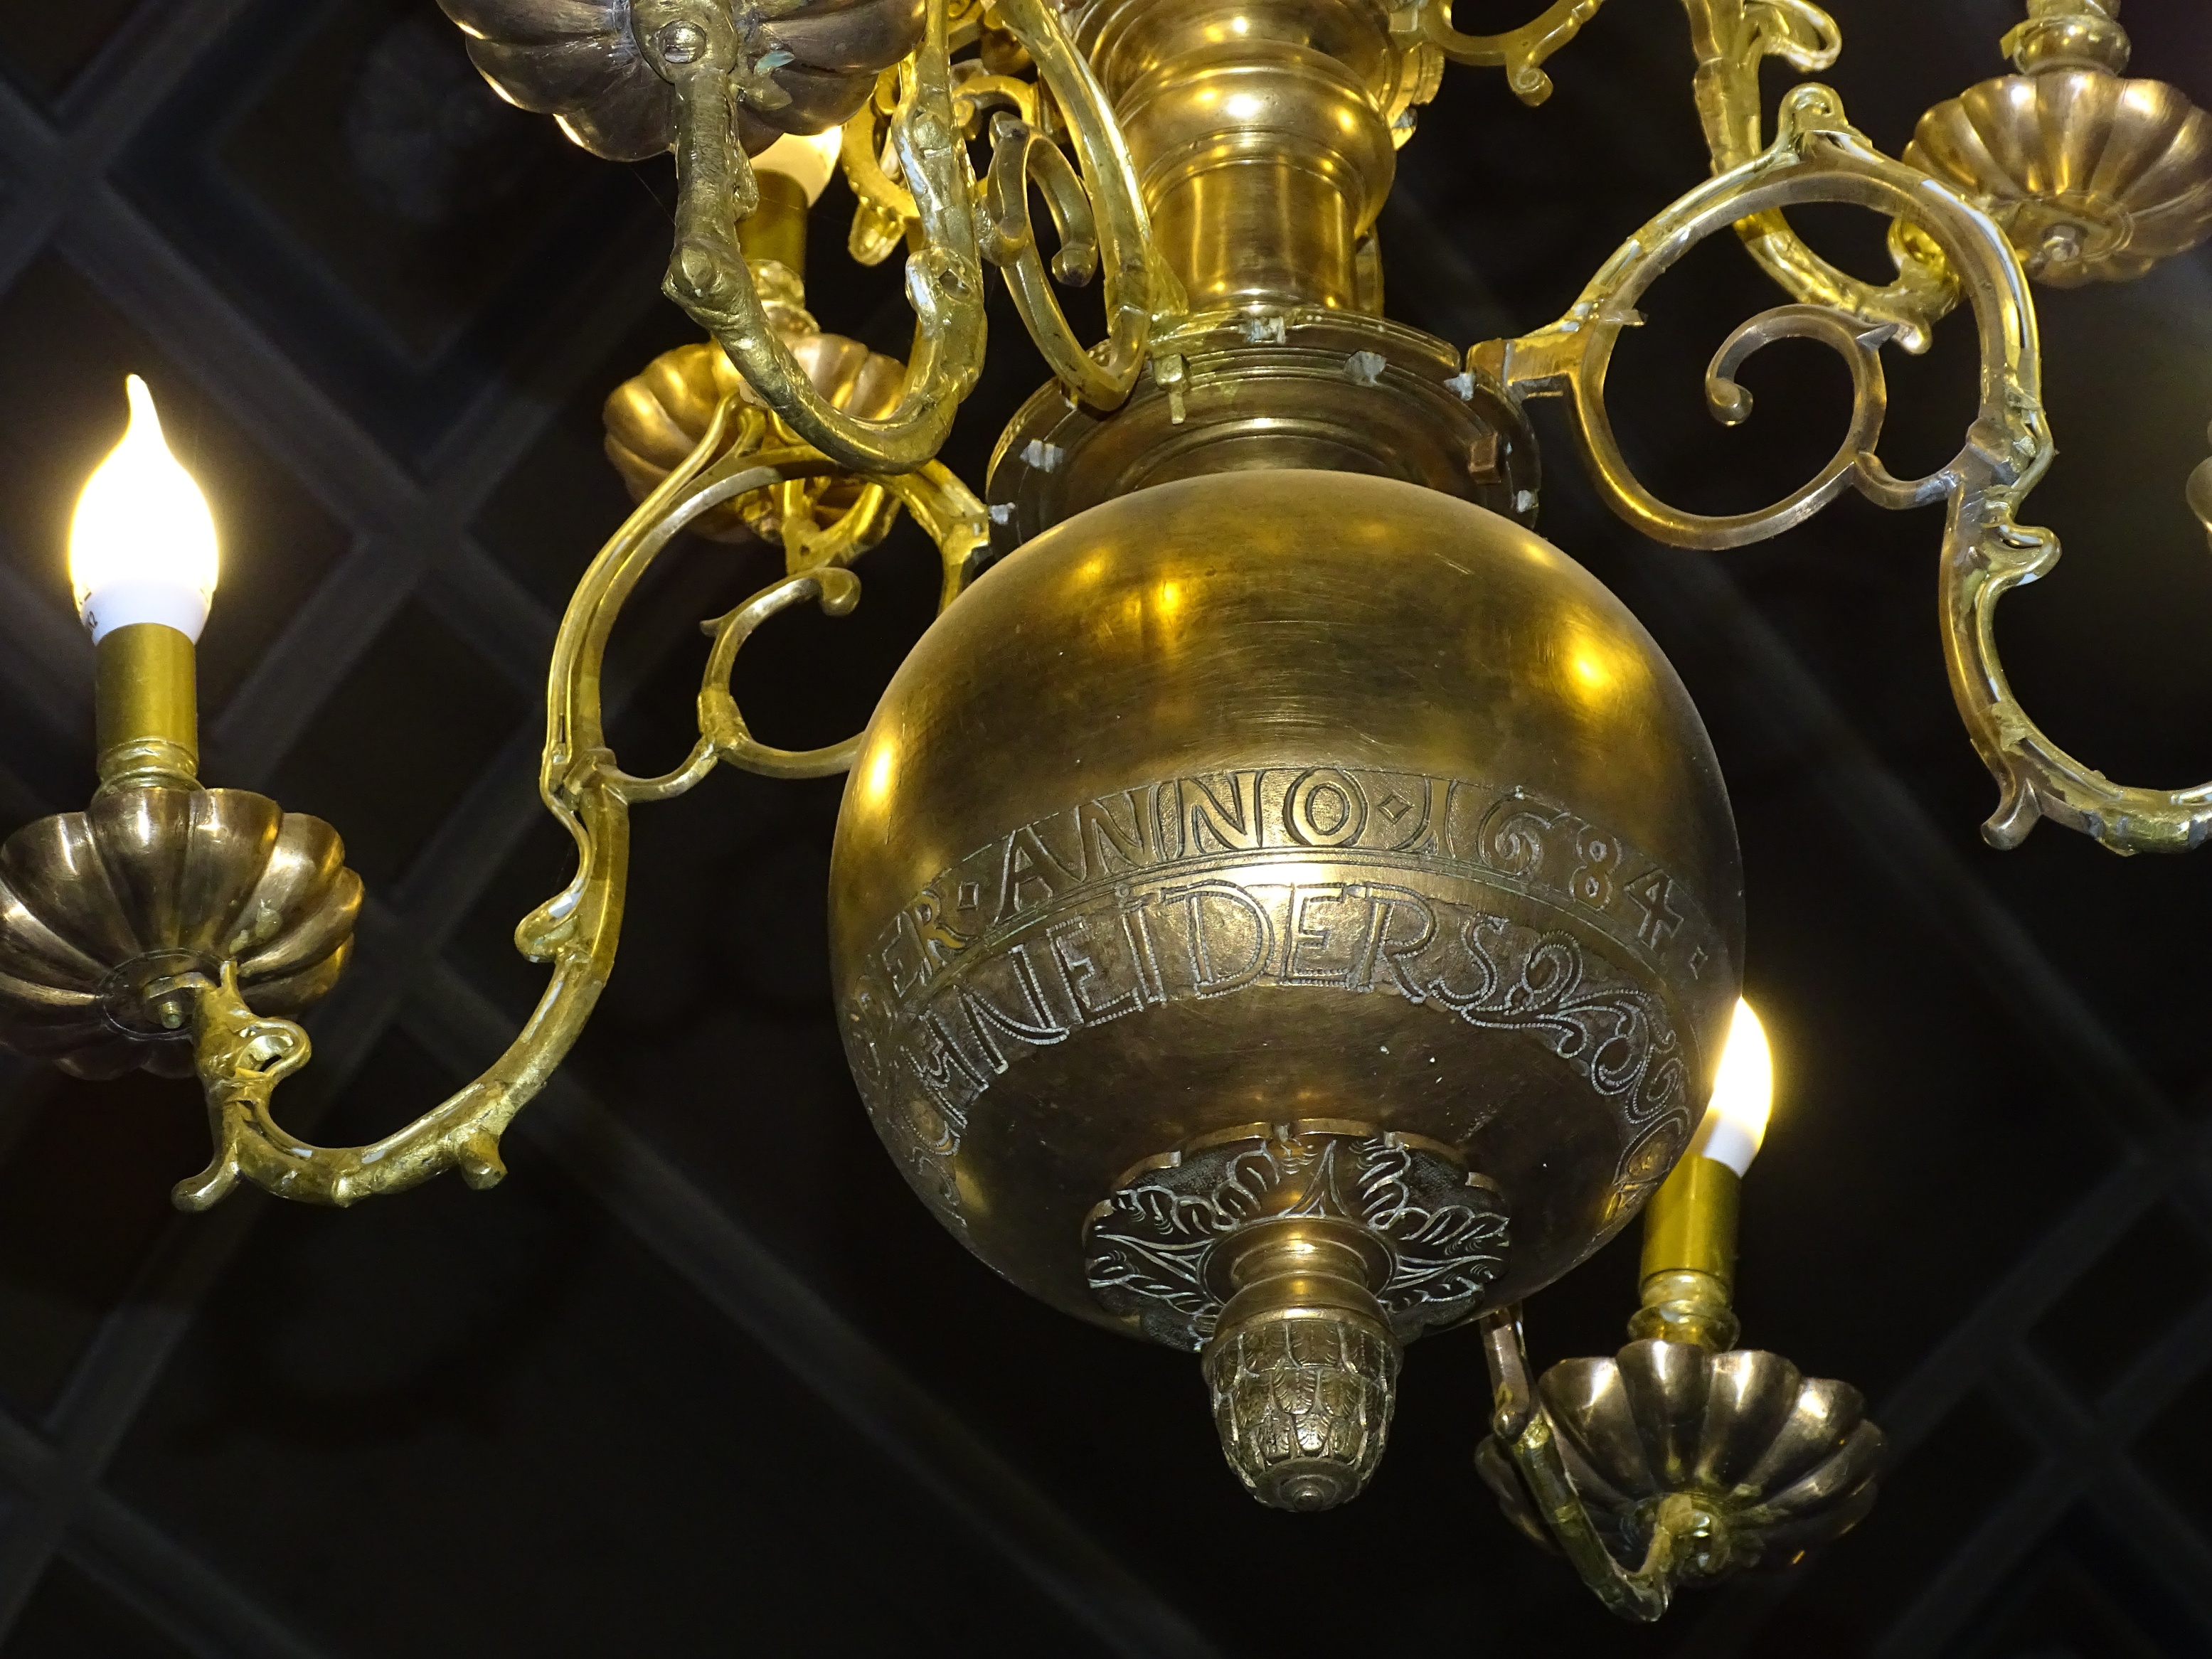 Fragment of the chandelier, 1684, Tukums Holy Trinity Evangelical Lutheran Church. Photo by Alantė Valtaitė-Gagač, 2021